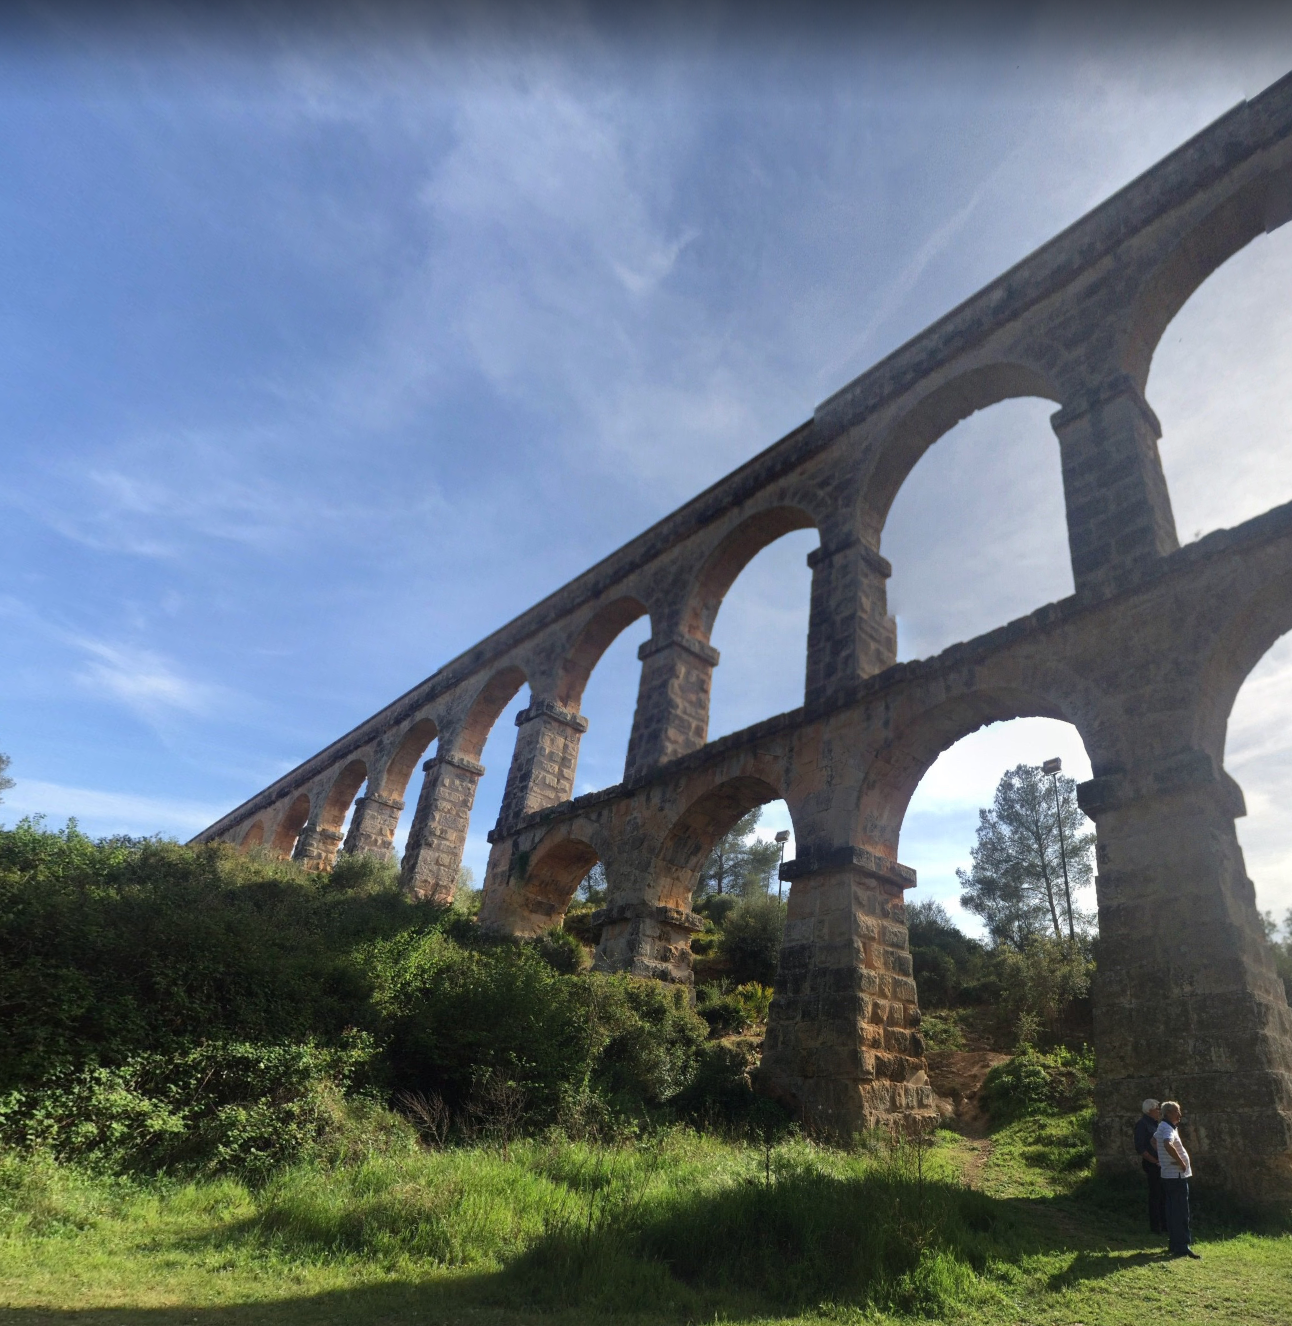 The Ferreres Aqueduct by Google Earth